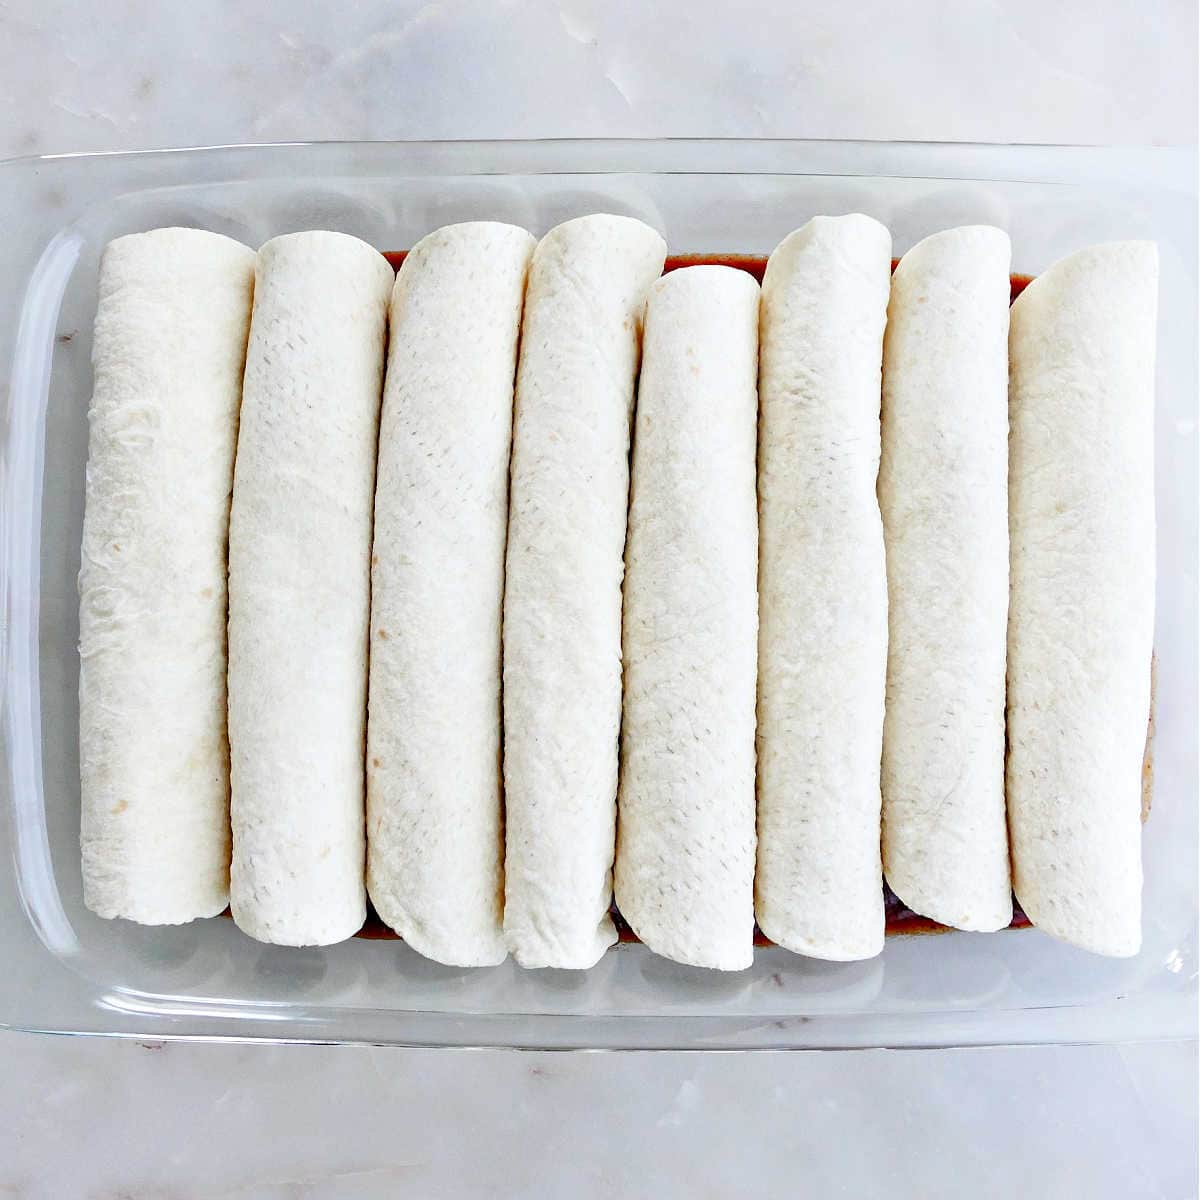 filled enchiladas rolled up and placed in a rectangular baking dish